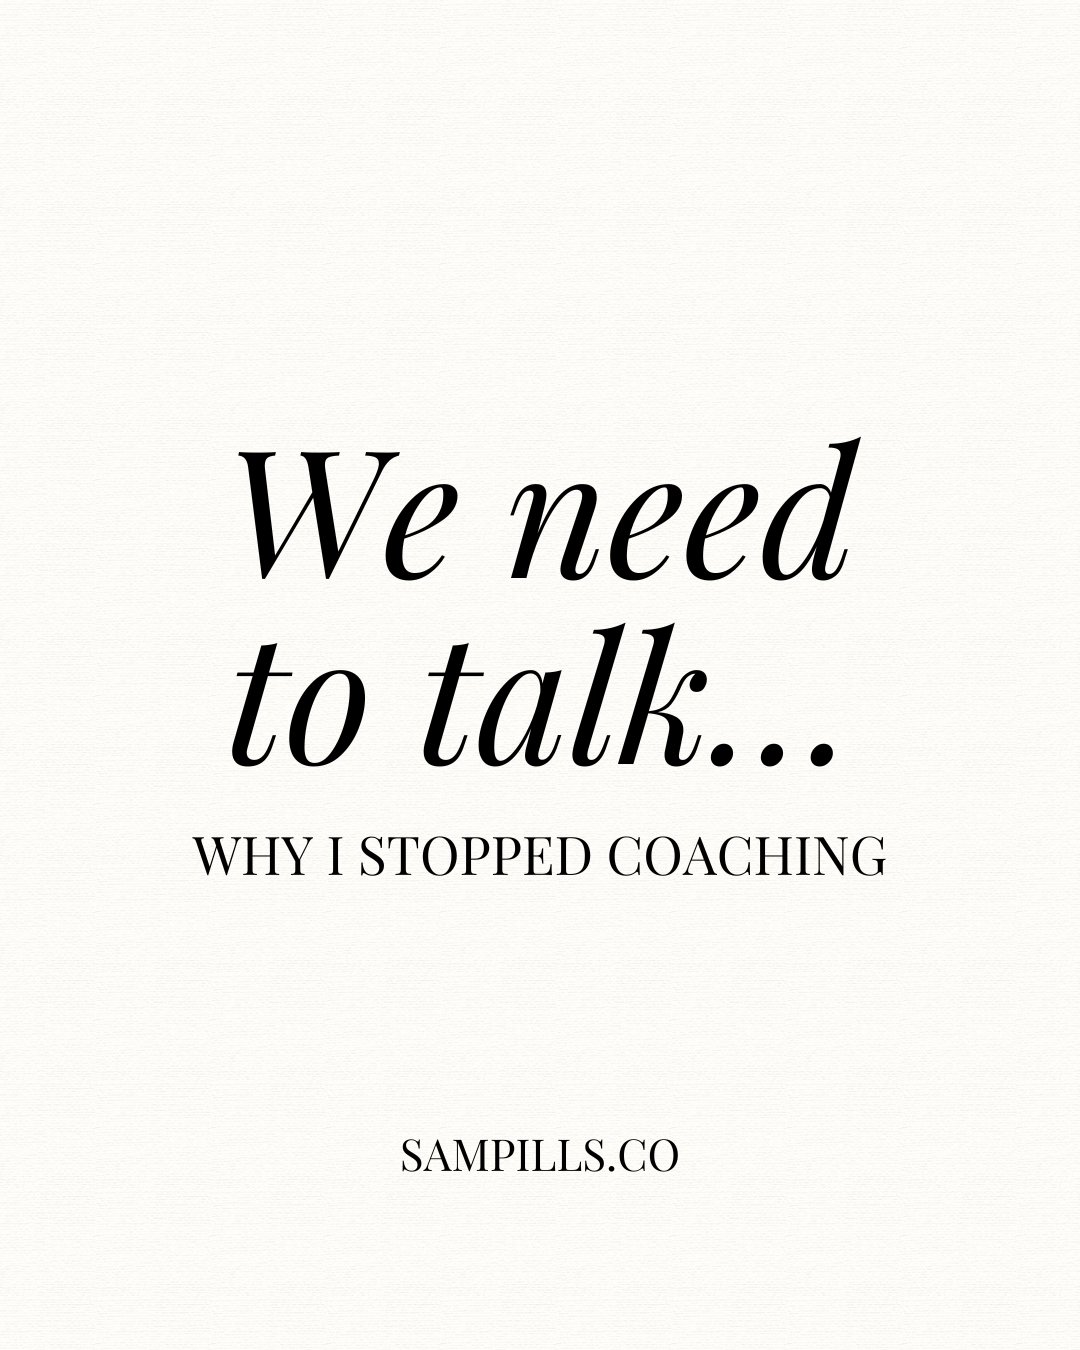 Am I anti-coaching? Not at all.

But for a people pleaser who just wants someone to tell them what to do, struggles to follow through  on promises to herself and doubts her own instincts, do I think coaching is the answer to get the results she wants